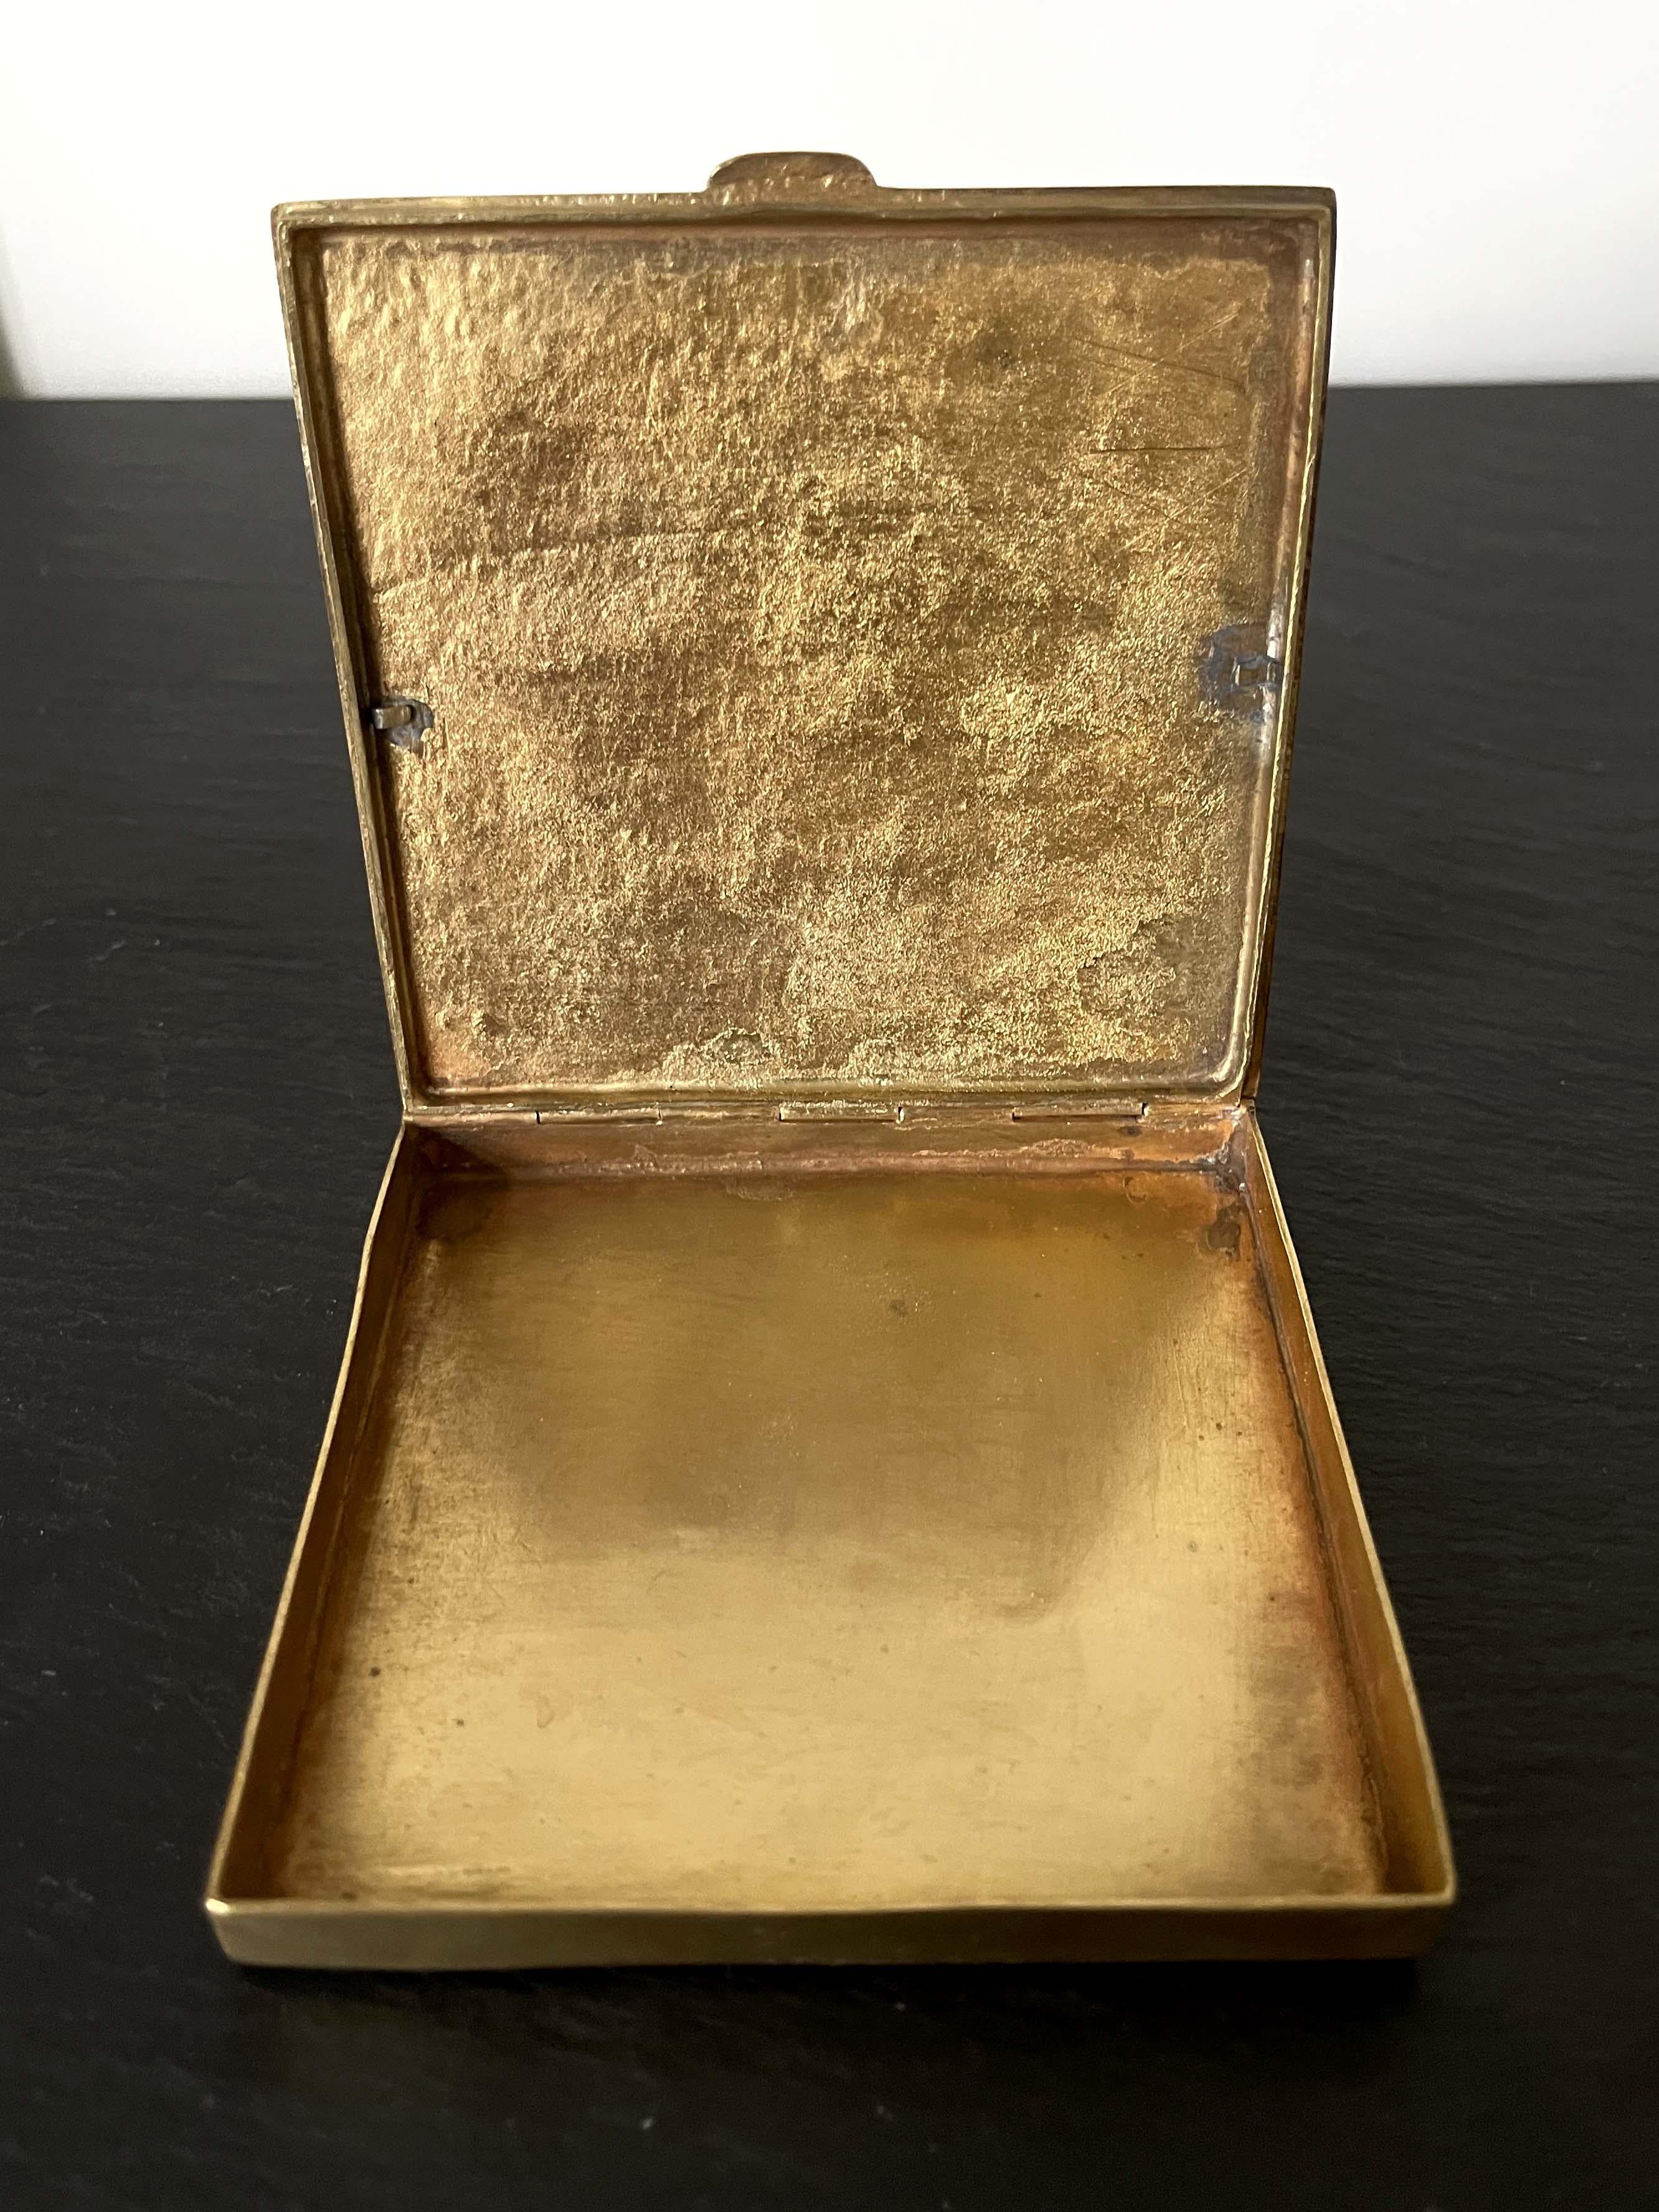 Mid-20th Century Gilded Bronze Box with Poem by French Art Jeweler Line Vautrin For Sale